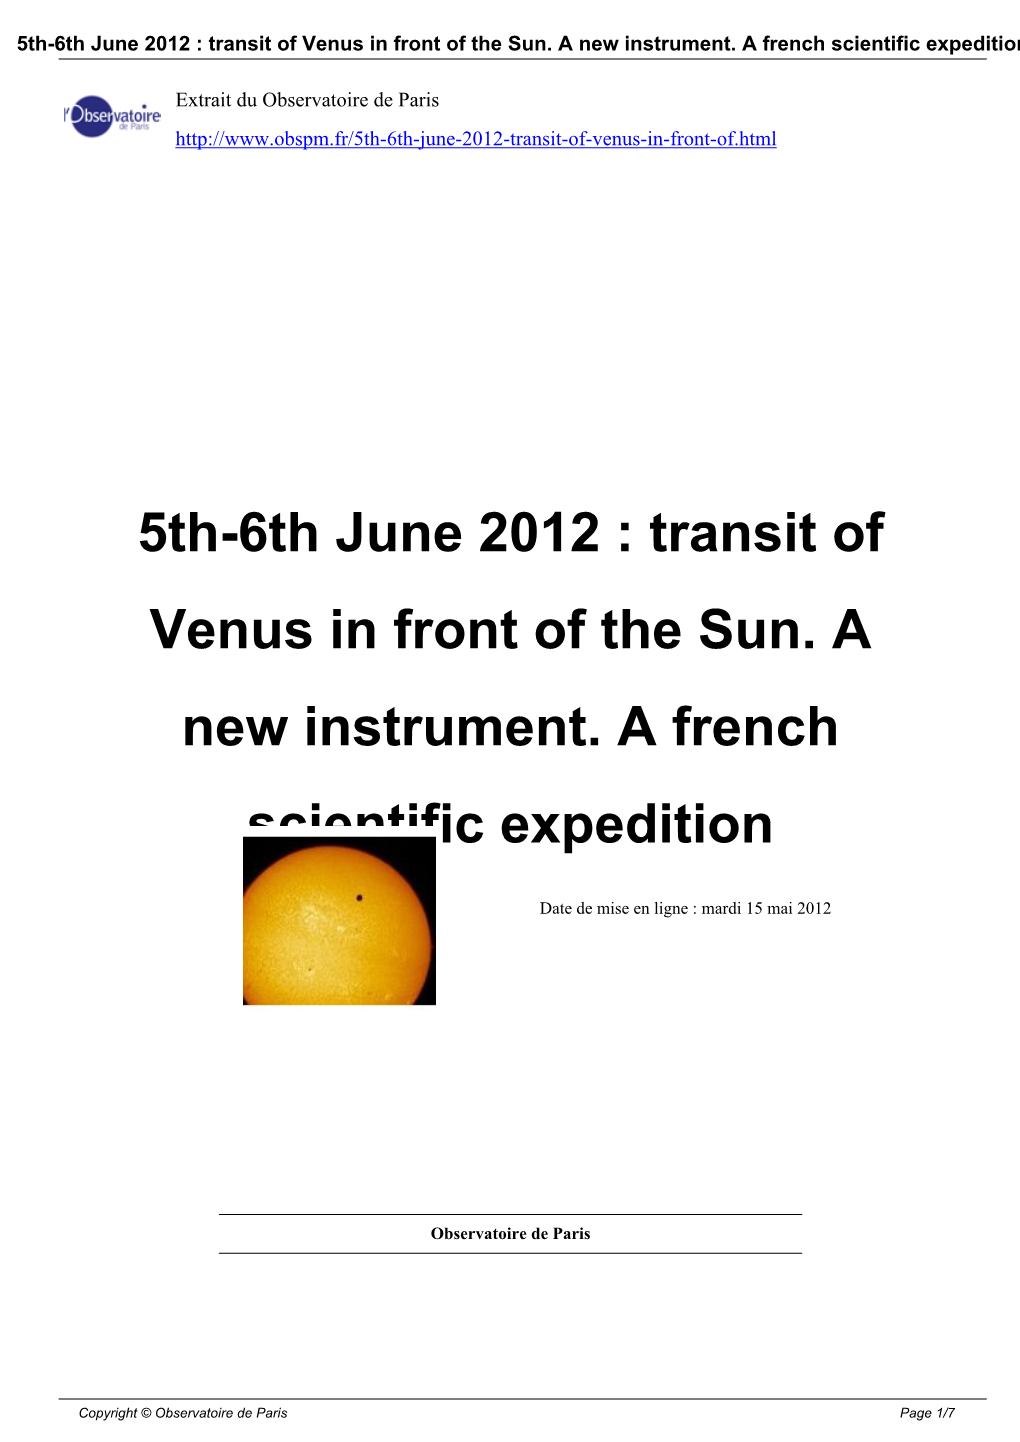 5Th-6Th June 2012 : Transit of Venus in Front of the Sun. a New Instrument. a French Scientific Expedition